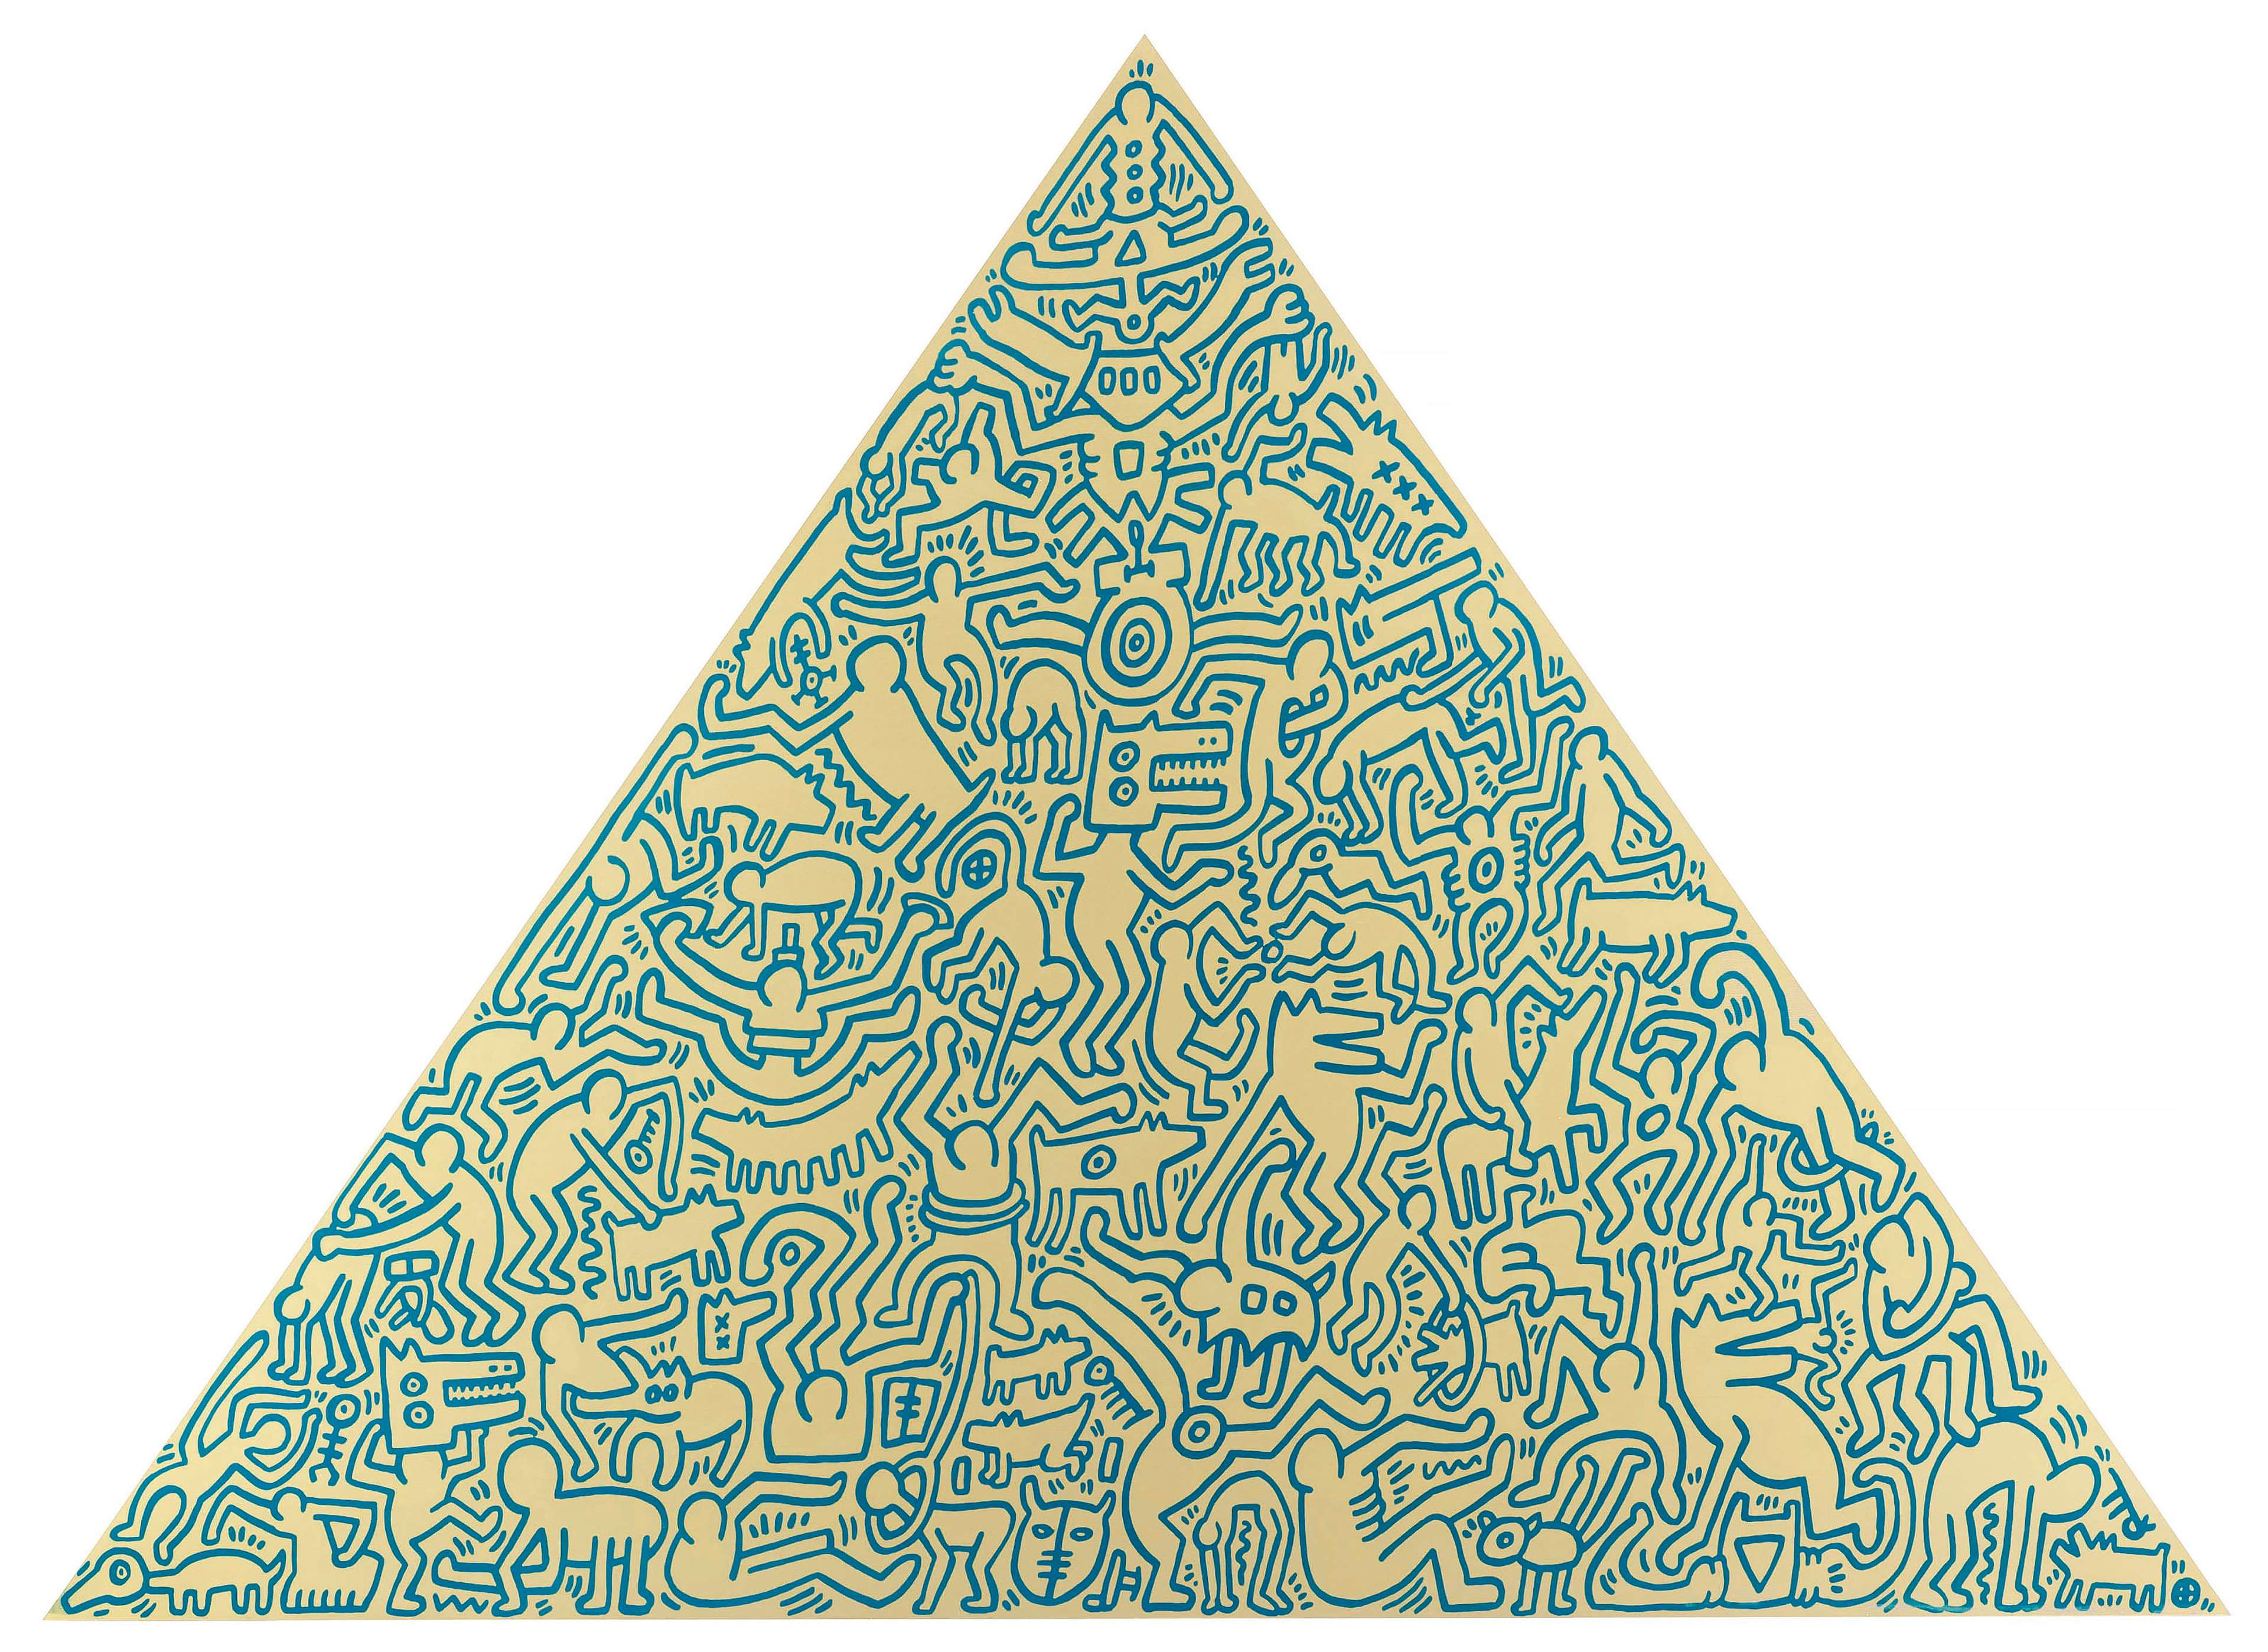 Keith Haring’s Pyramid (gold II). A Pop Art screenprint of a gold triangle with blue figures in various poses inside of it.